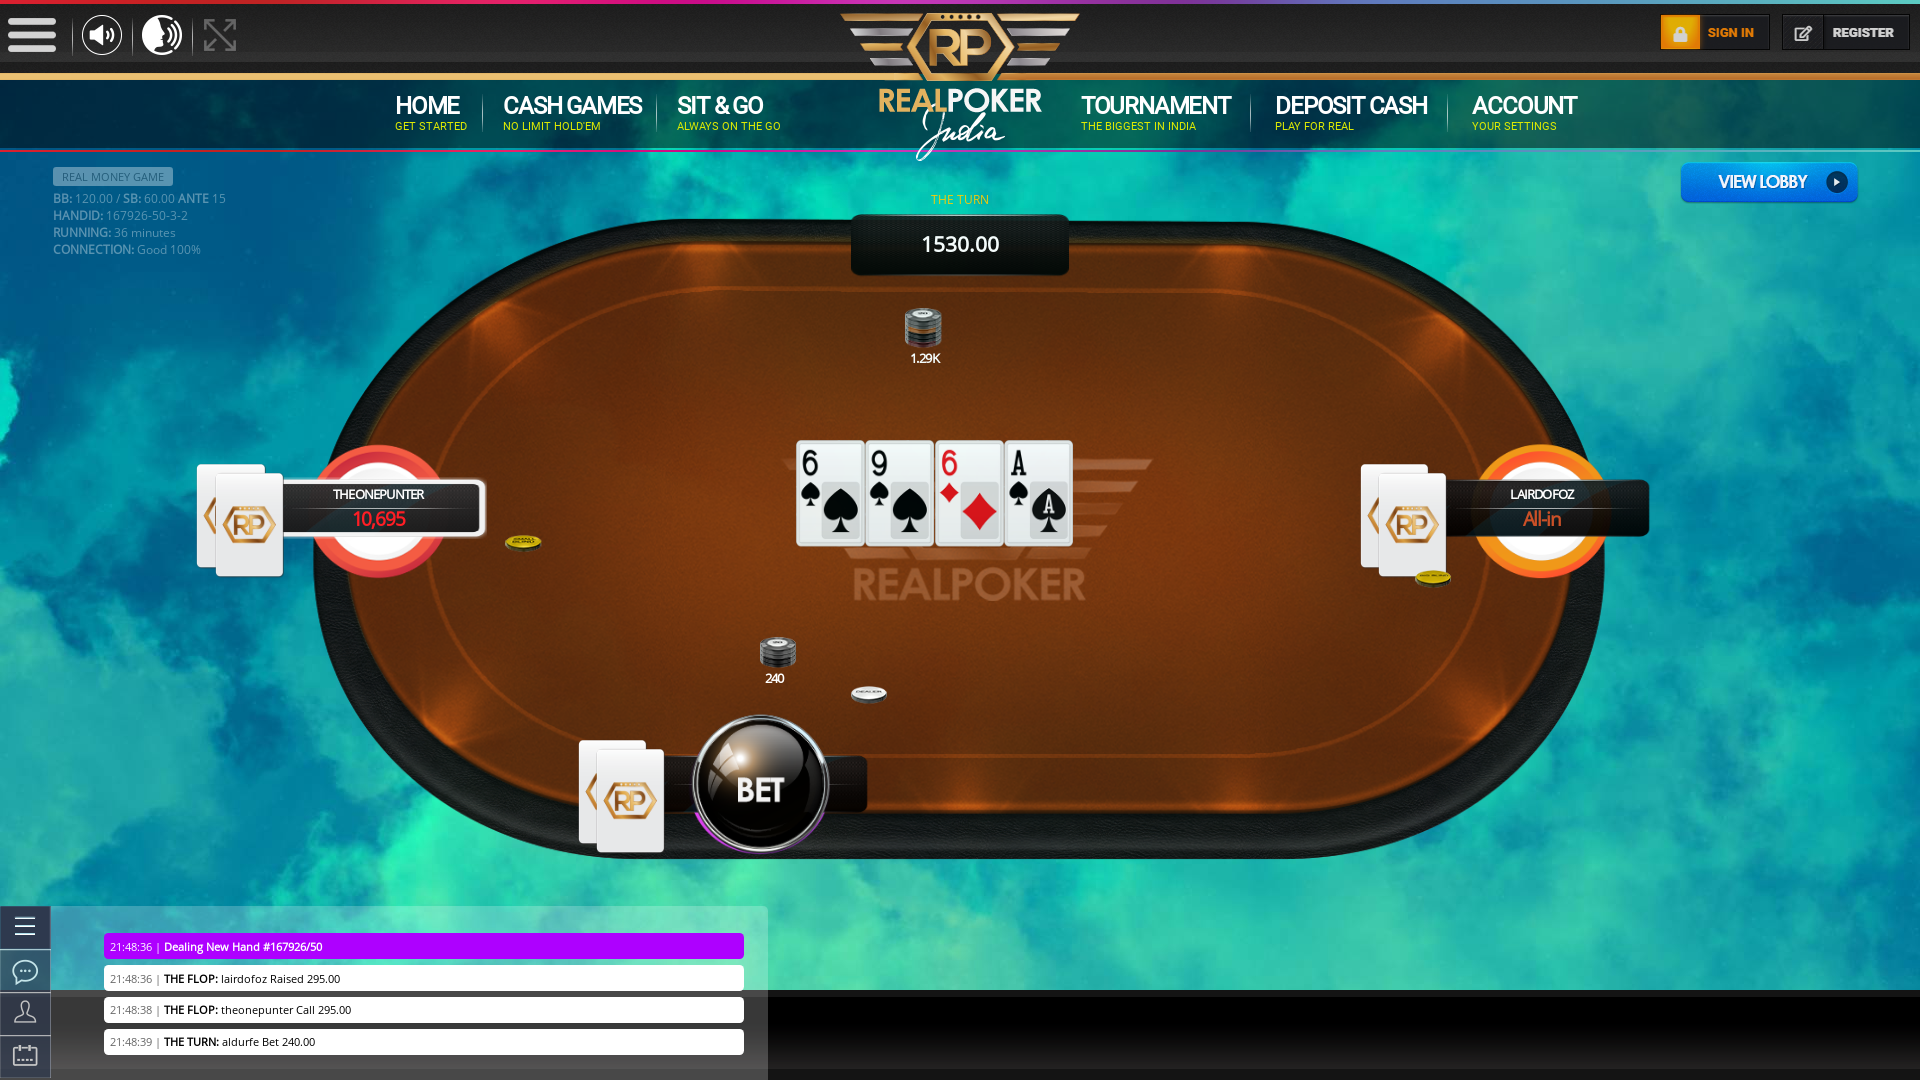 Real poker on a 10 player table in the 35th minute of the game